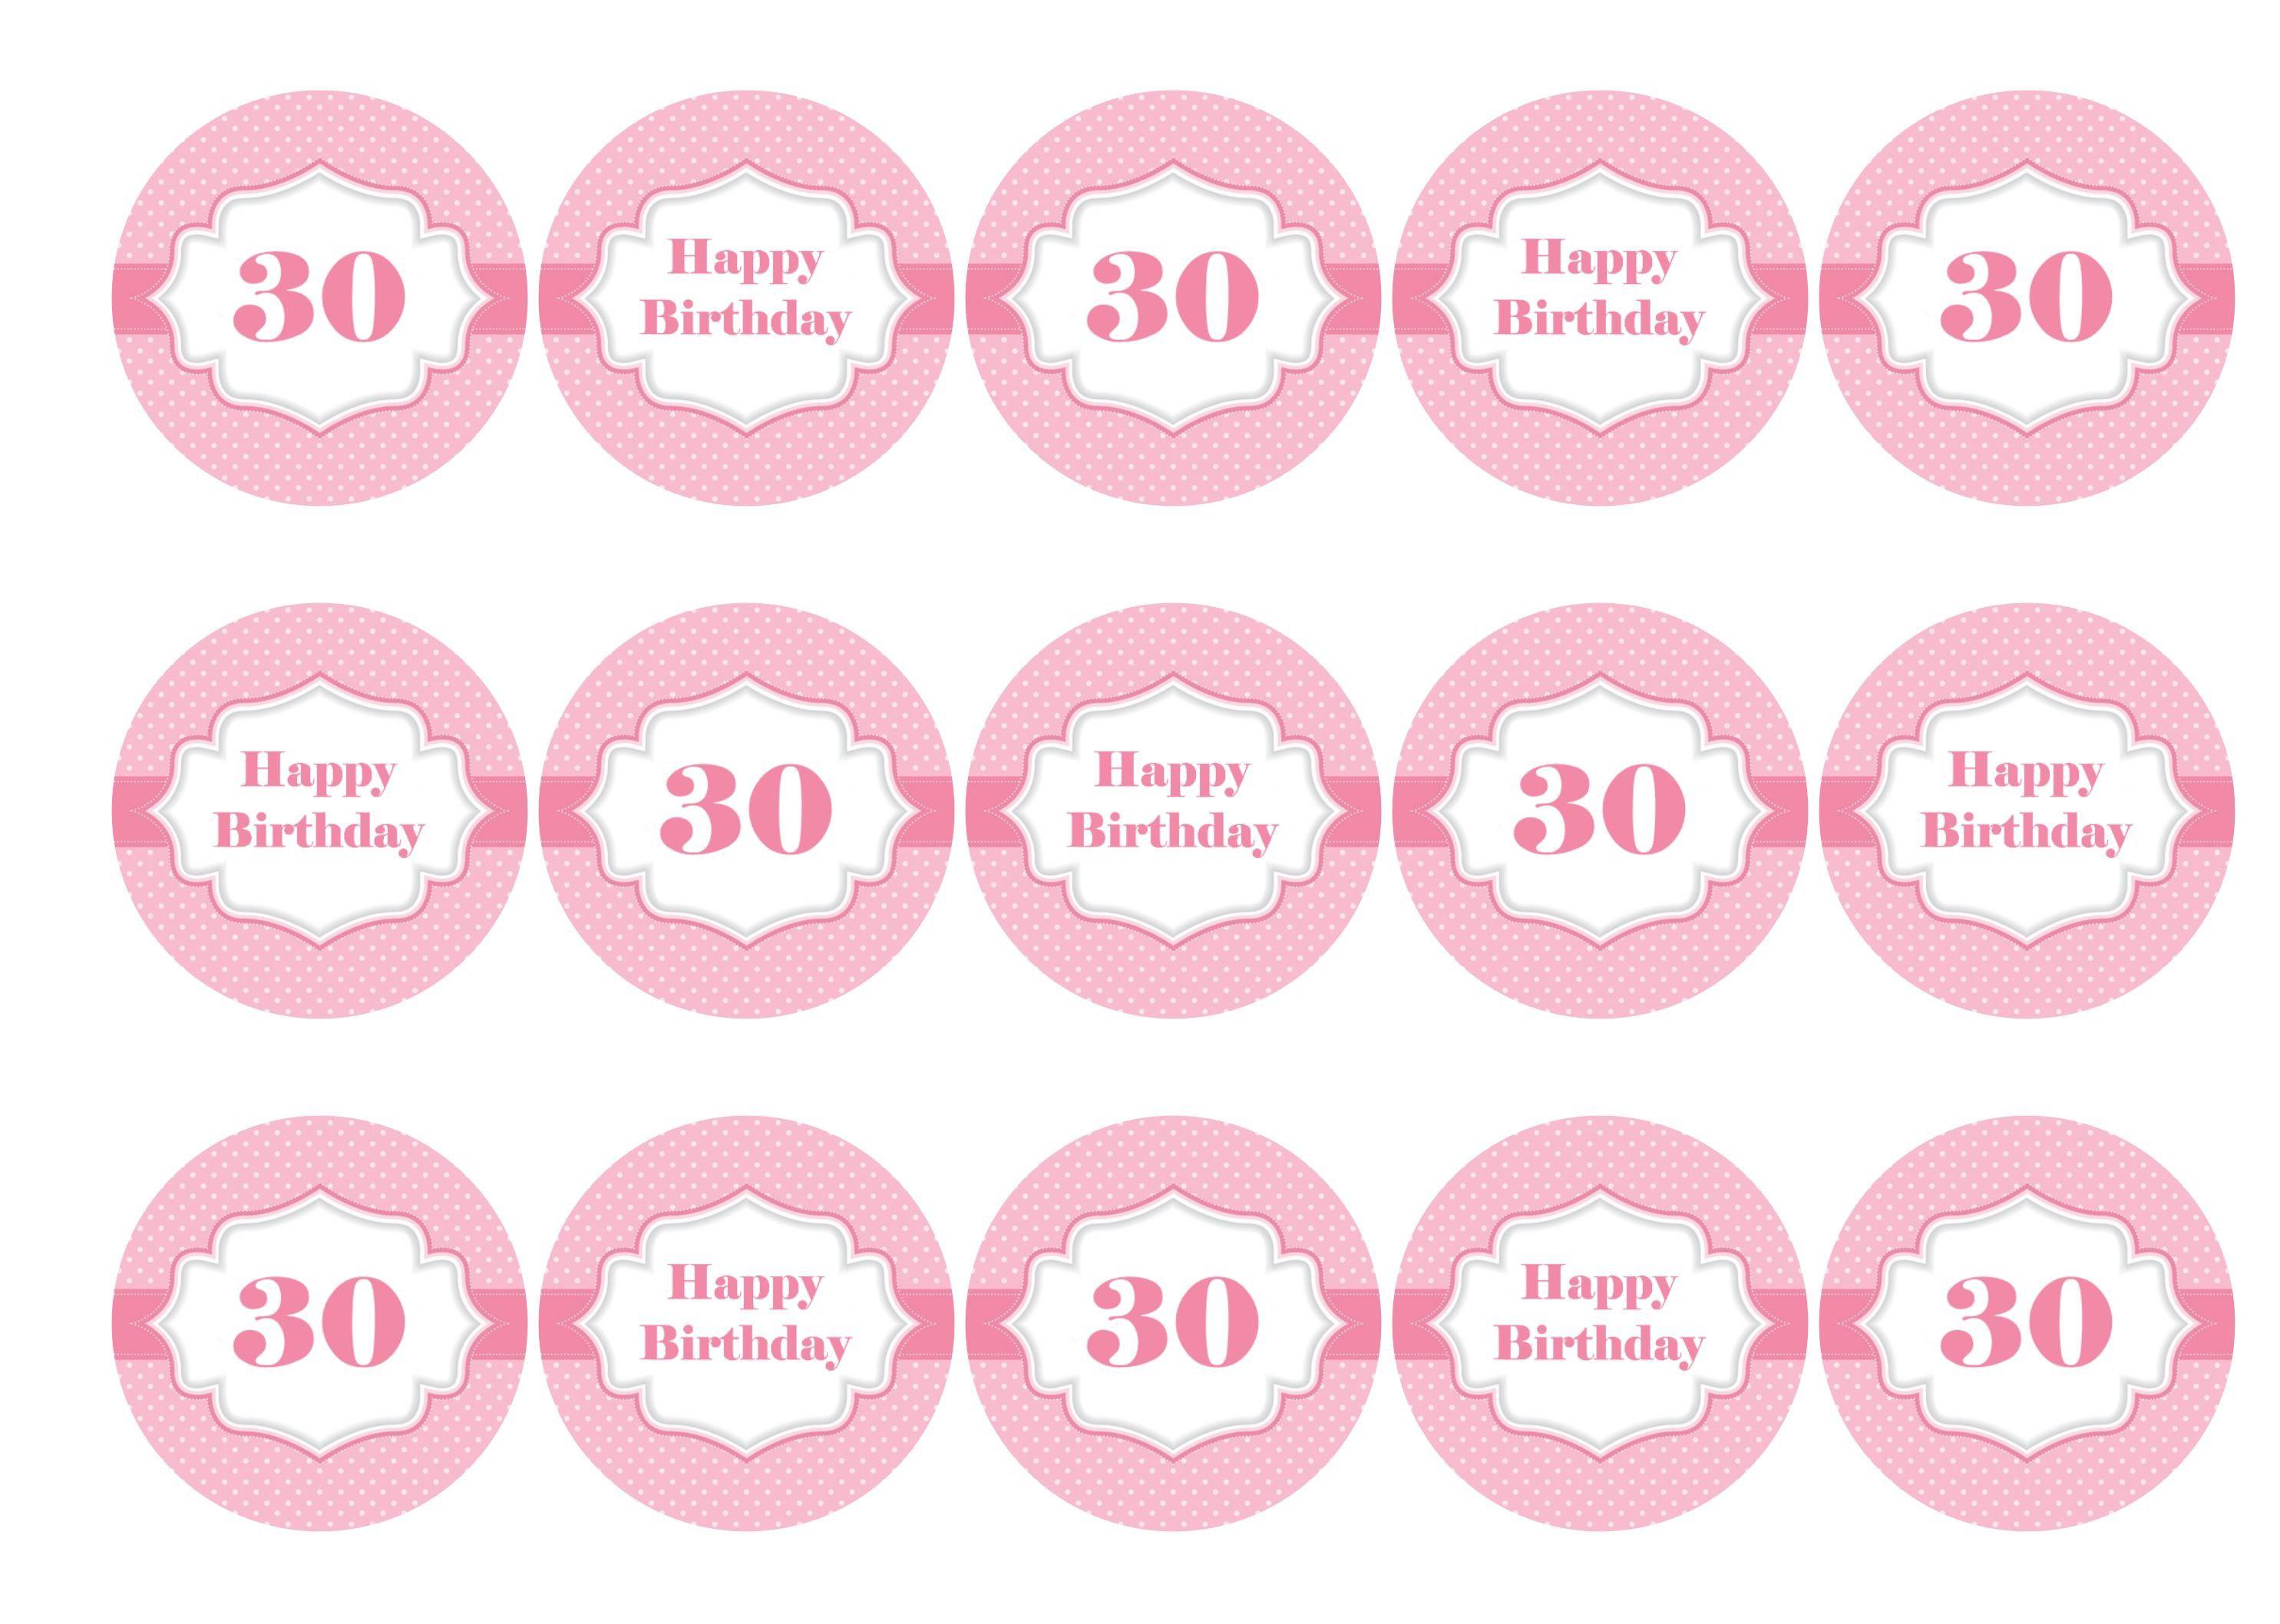 Printed edible cake toppers with images for a ladies 30th birthday